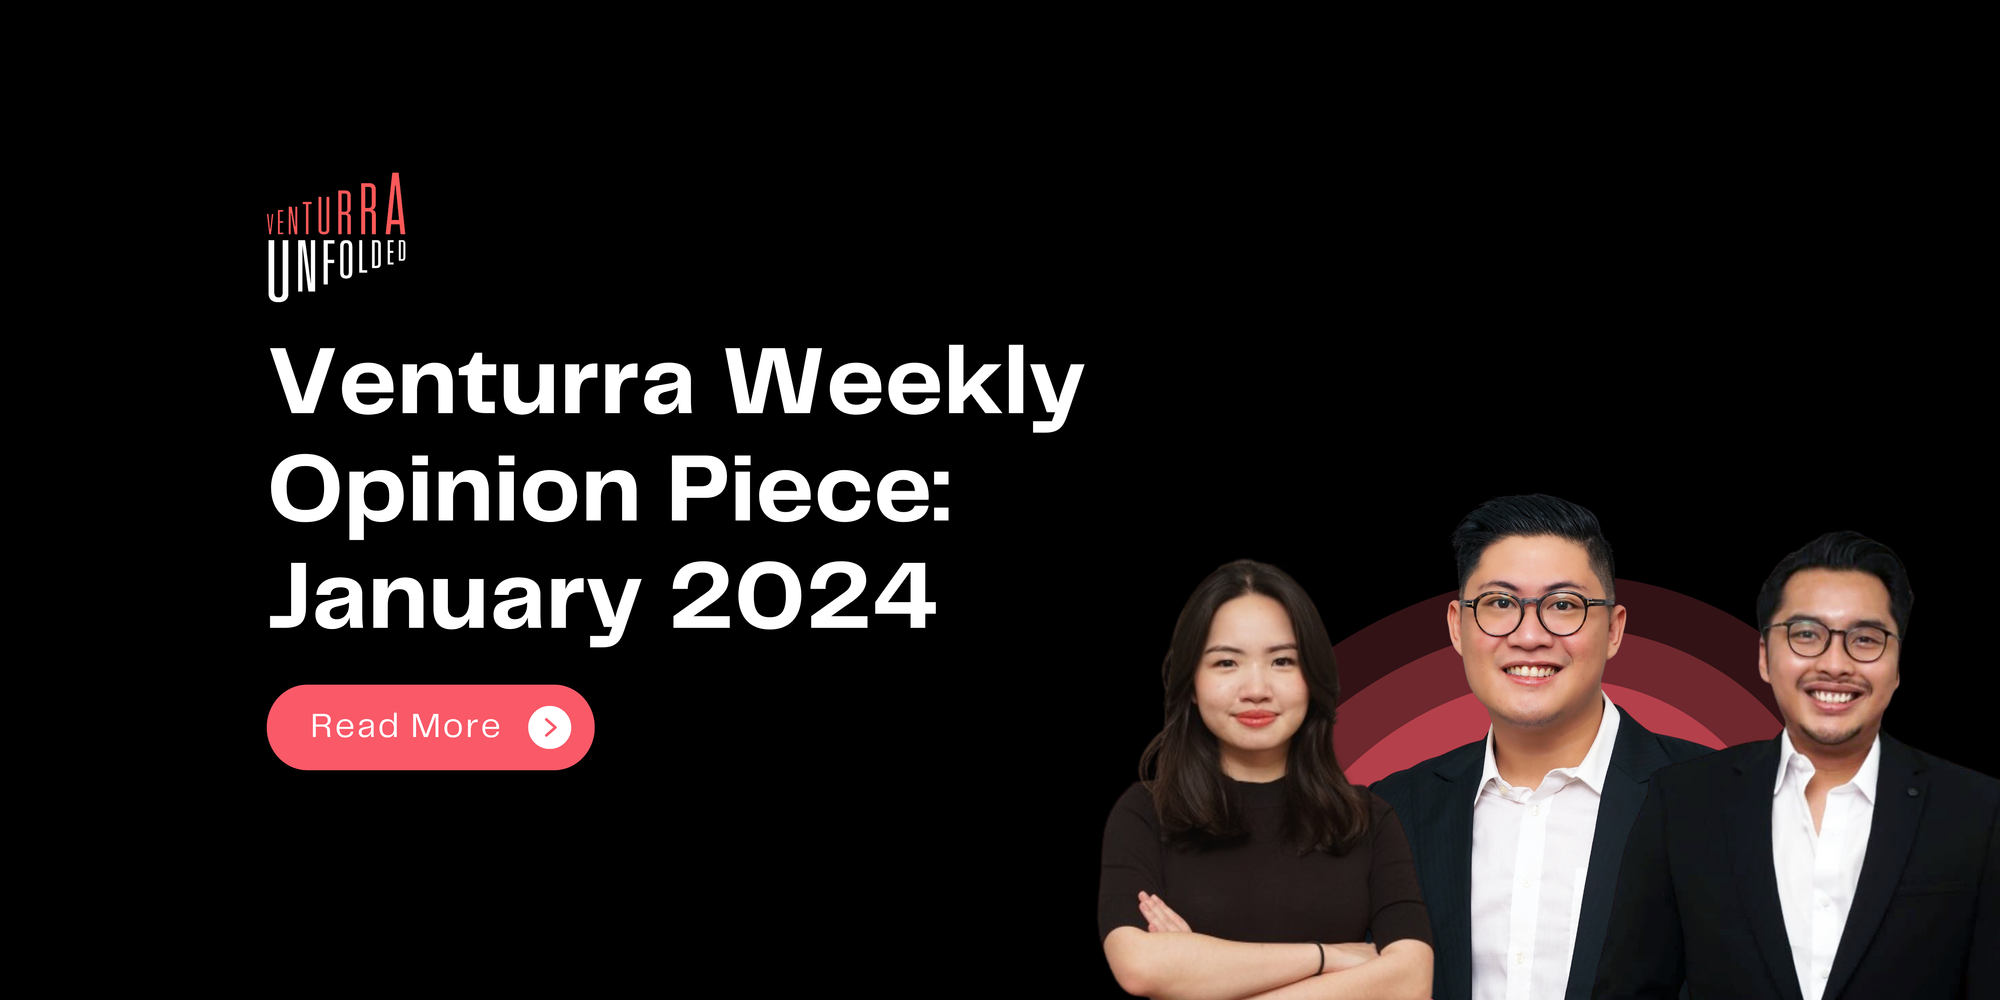 Venturra Weekly Opinion Piece: Live Commerce, Health Care, and Financial Services in 2024